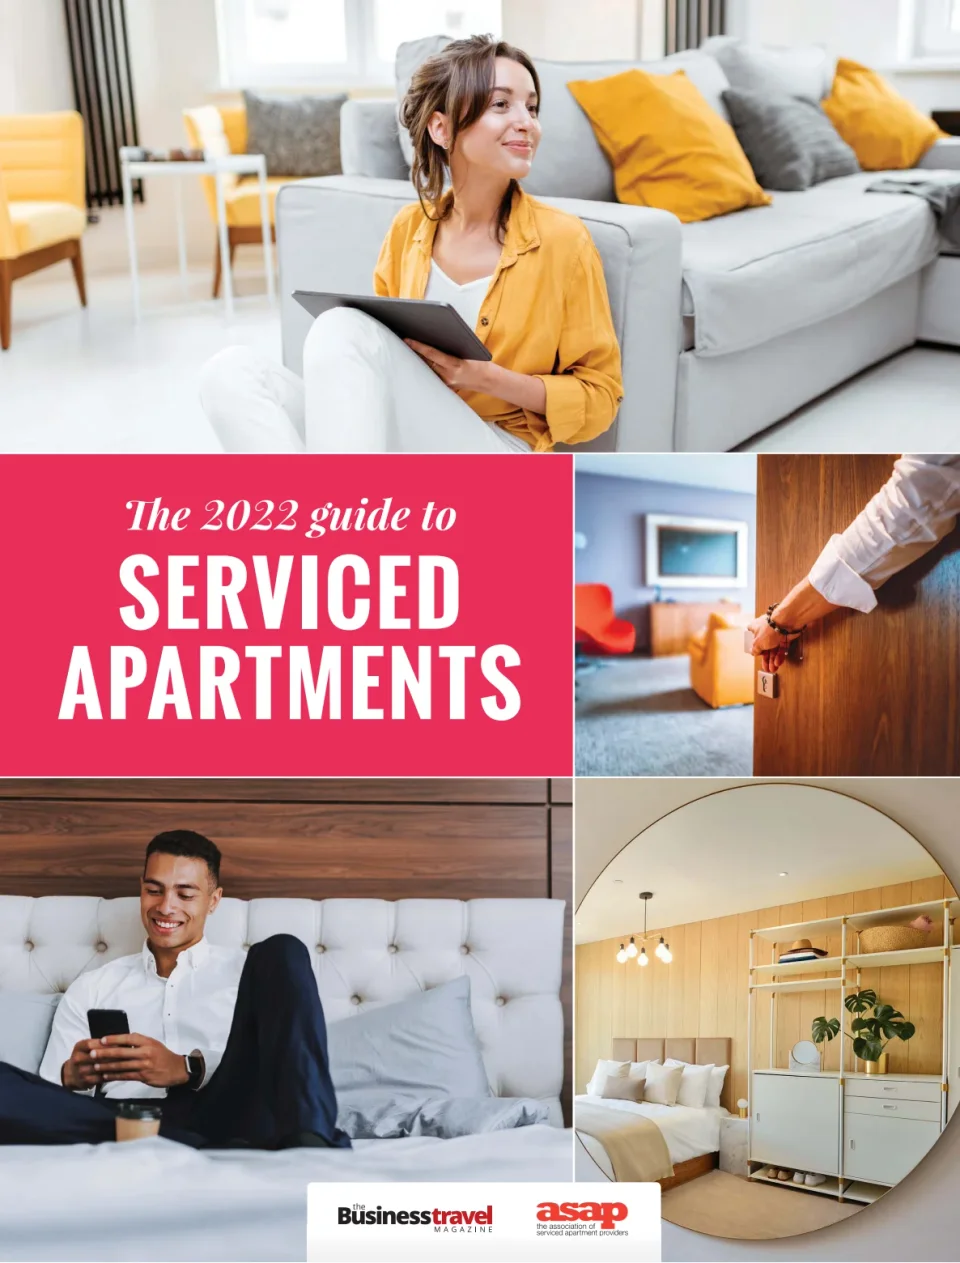 The Guide to Serviced Apartments